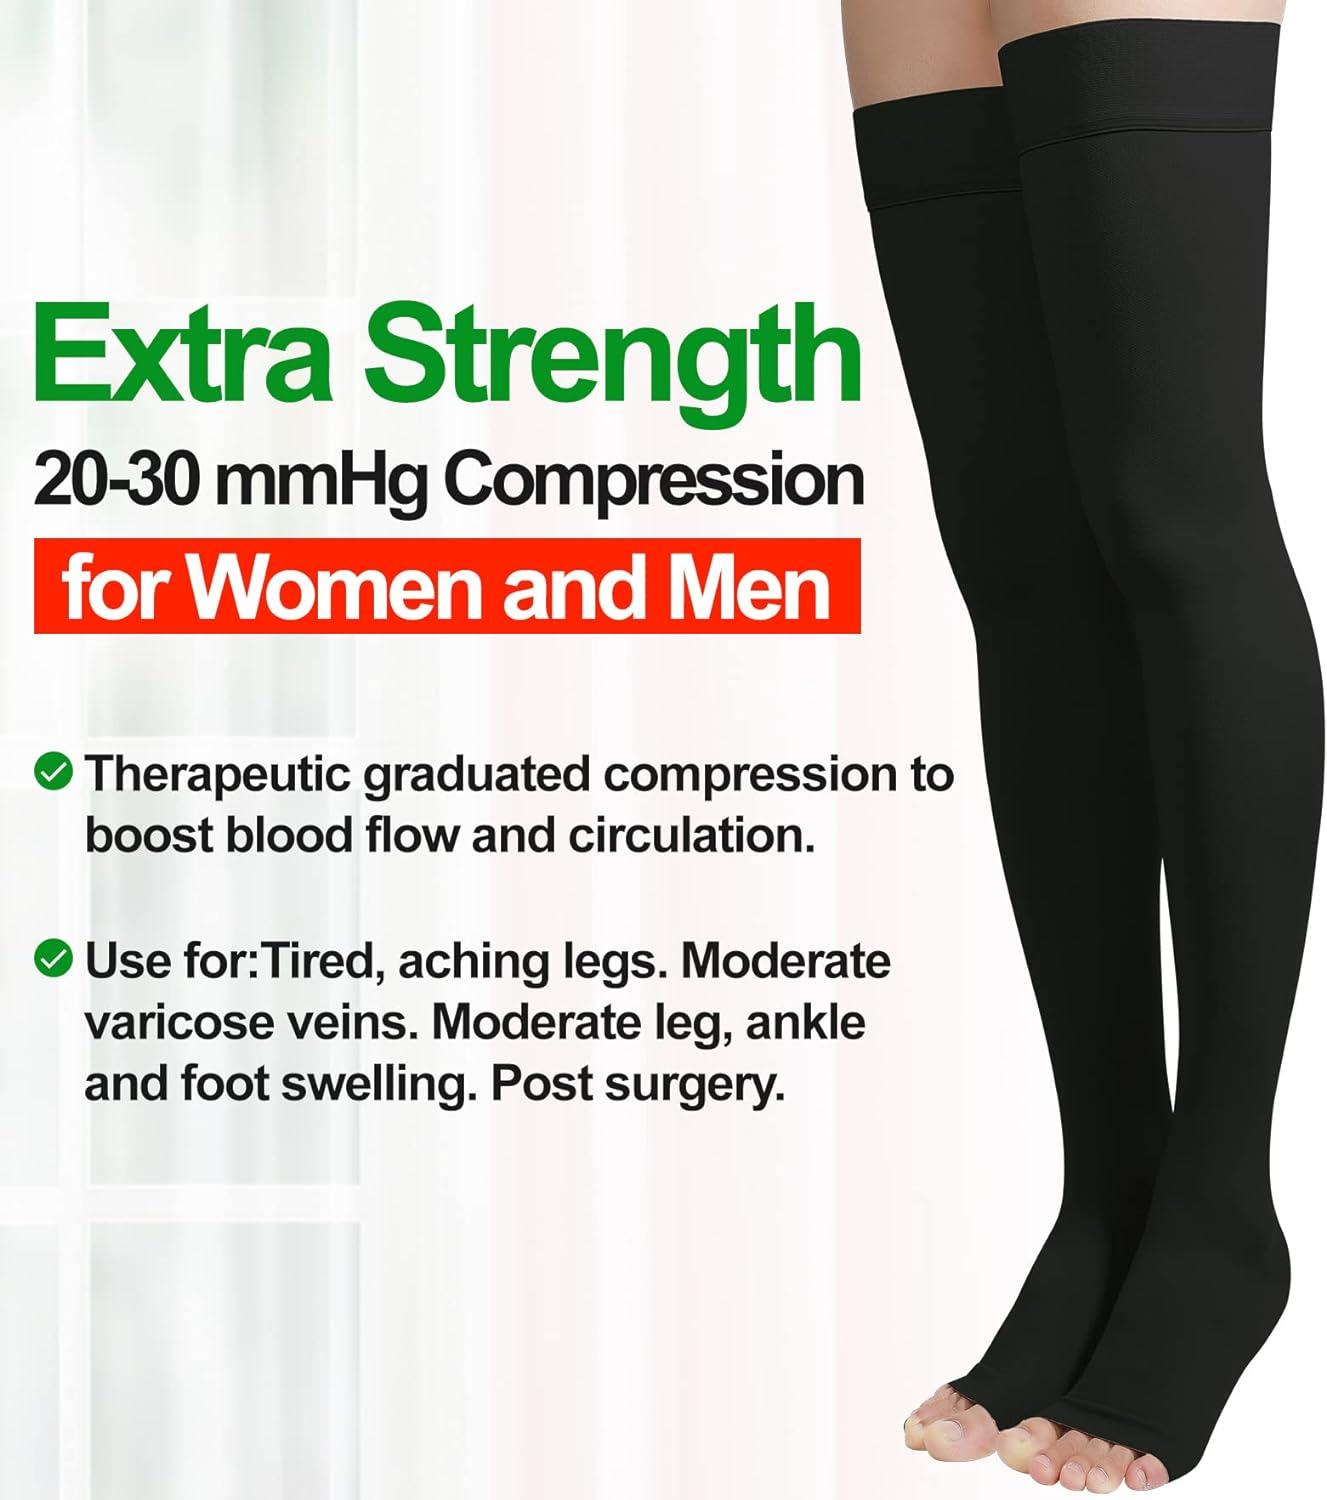 Thigh High Compression Stockings, Closed Toe, Pair, Firm Support 20-30mmHg  Gradient Compression Socks with Silicone Band, Unisex, Opaque, Best for